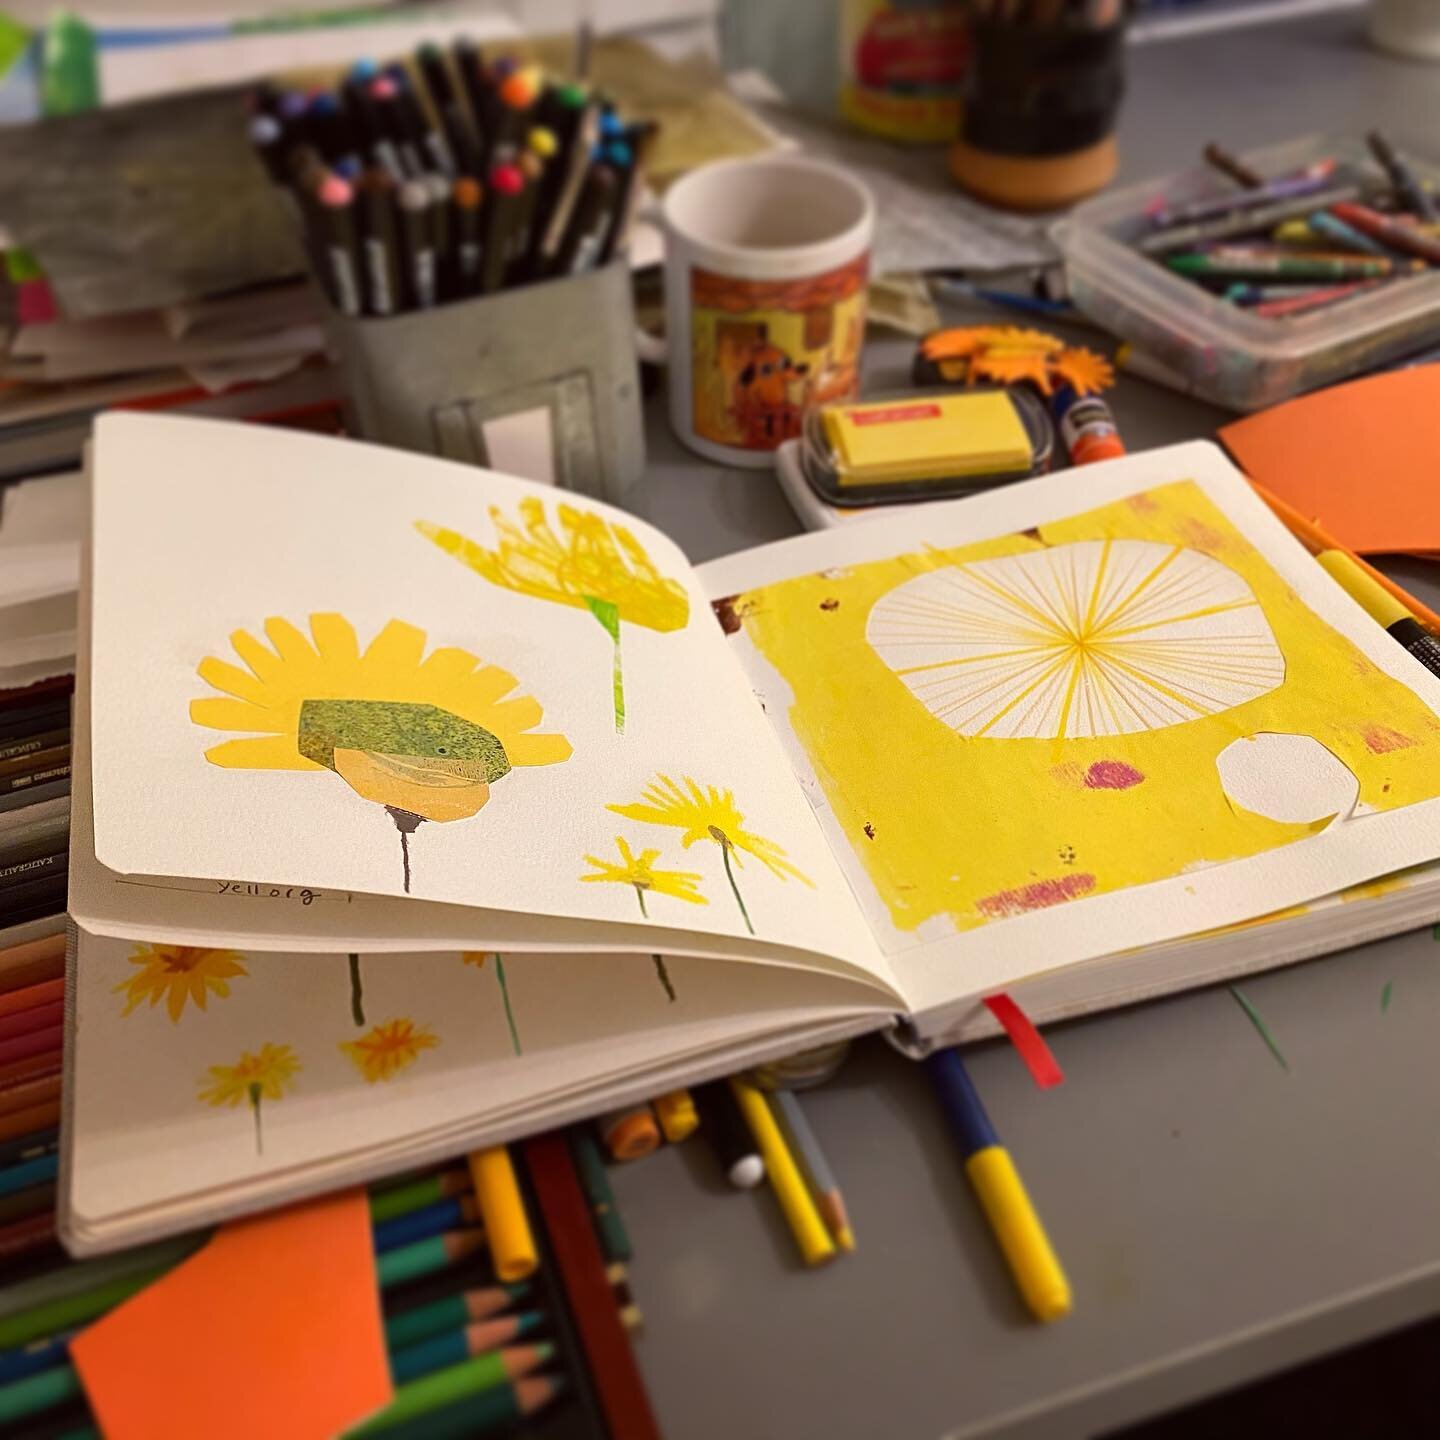 i think i&rsquo;m calling it a night (+ now there&rsquo;s a huge mess that i can&rsquo;t blame on the kids!) #illustrationinprogress #artprocess #artplay #collageart #cutpapercollage #newsketchbook @artezaofficial #dandelion #inspiredbynature